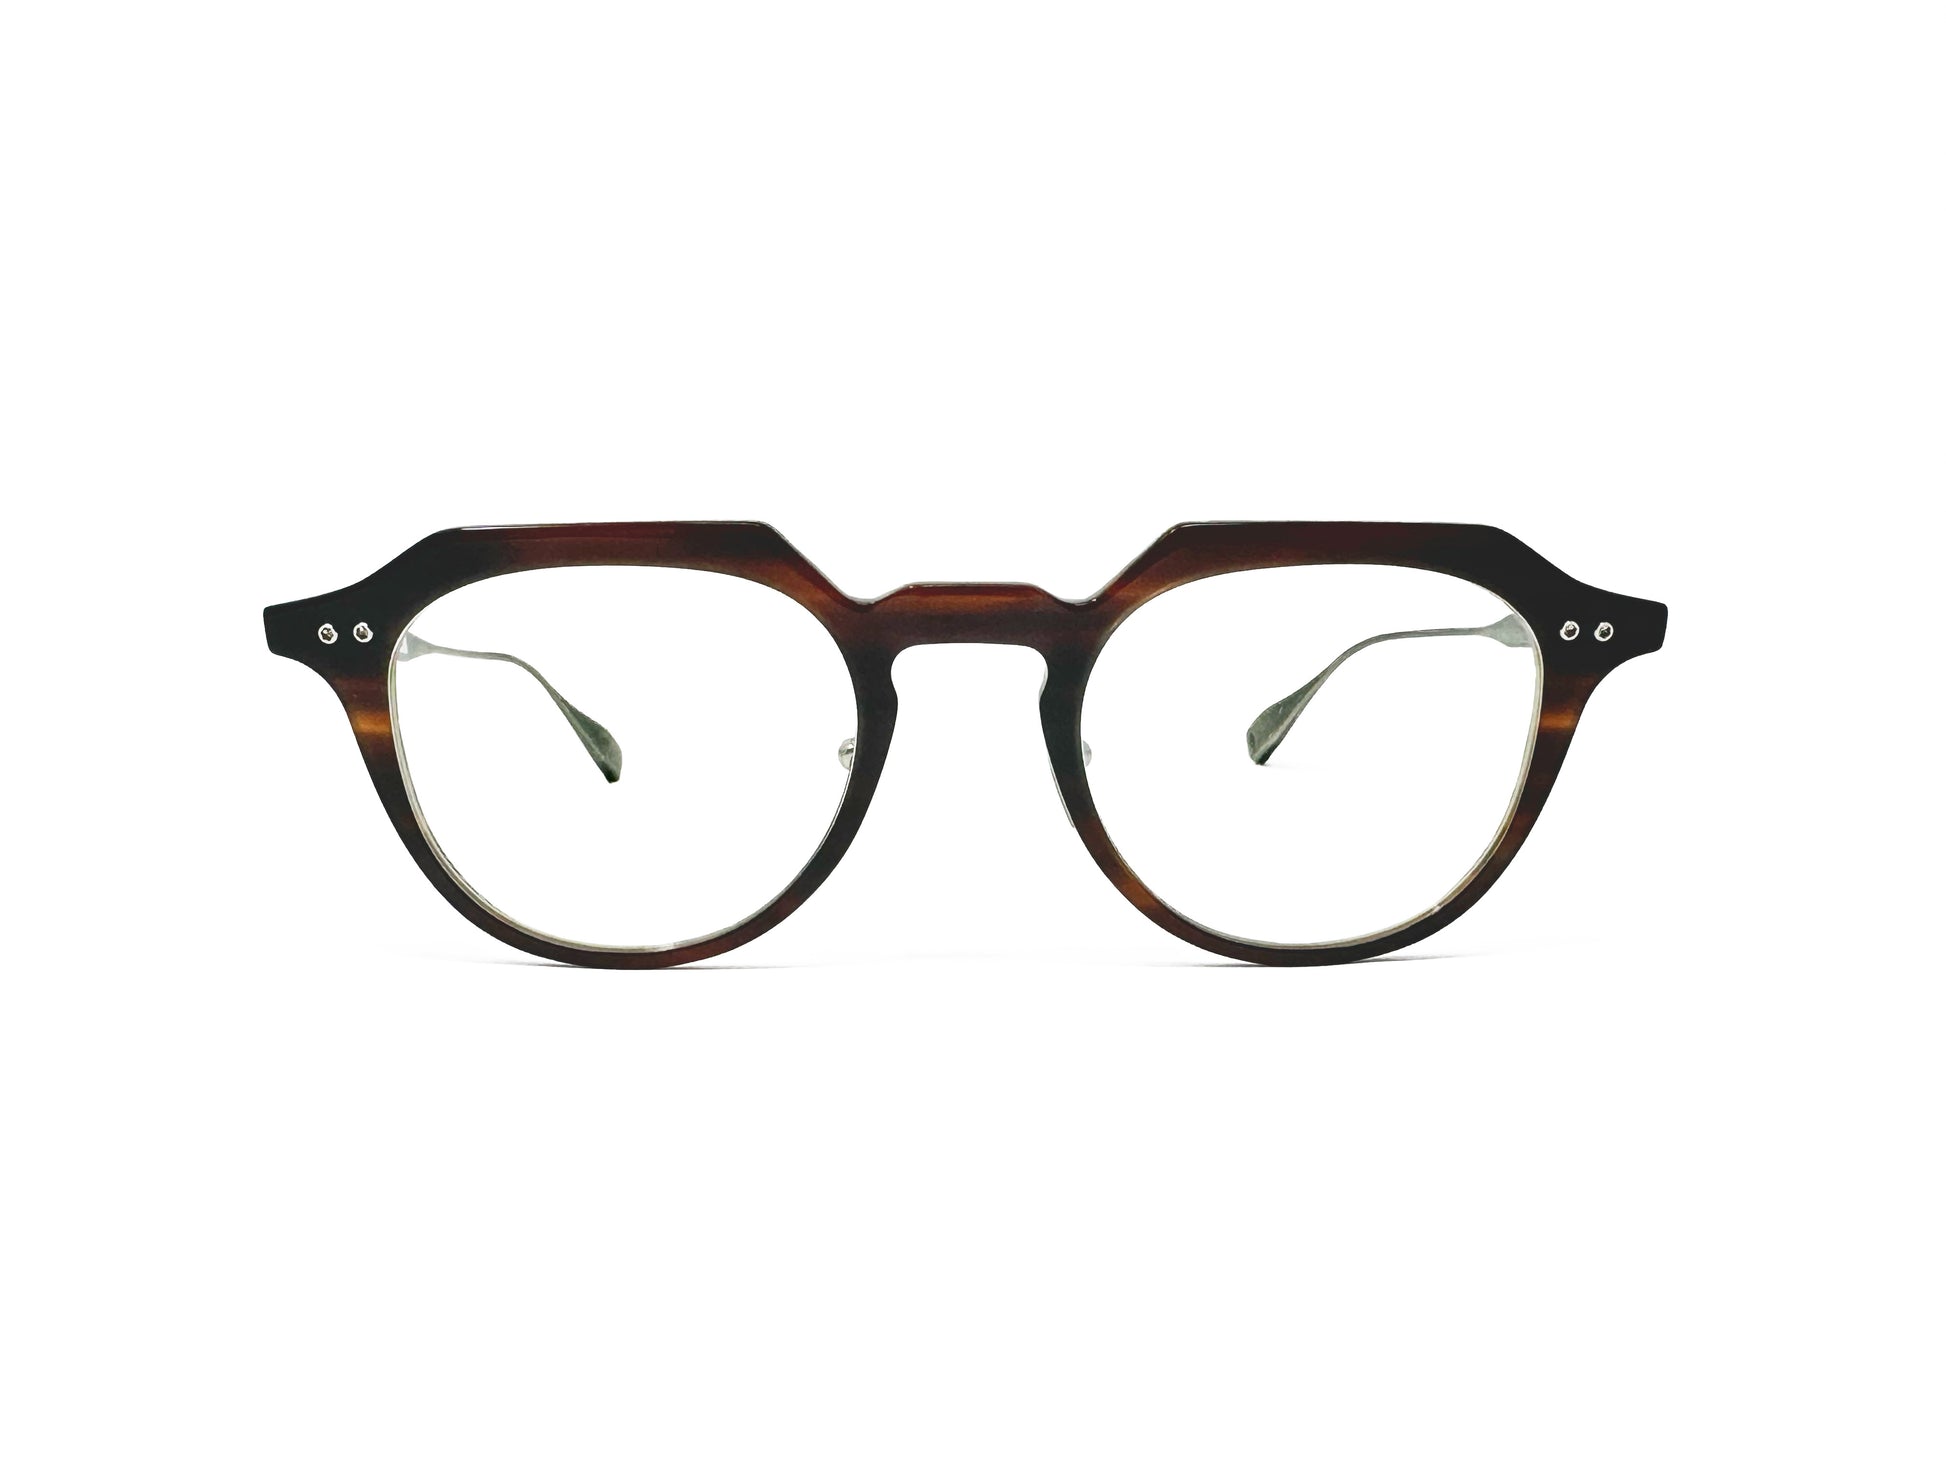 Dita Eyewear rounded optical frame with flat-top and keyhole bridge, acetate front with metal temples. Model: Oku. Color: 02 - Chestnut Swirl with antique silver temples. Front view. 